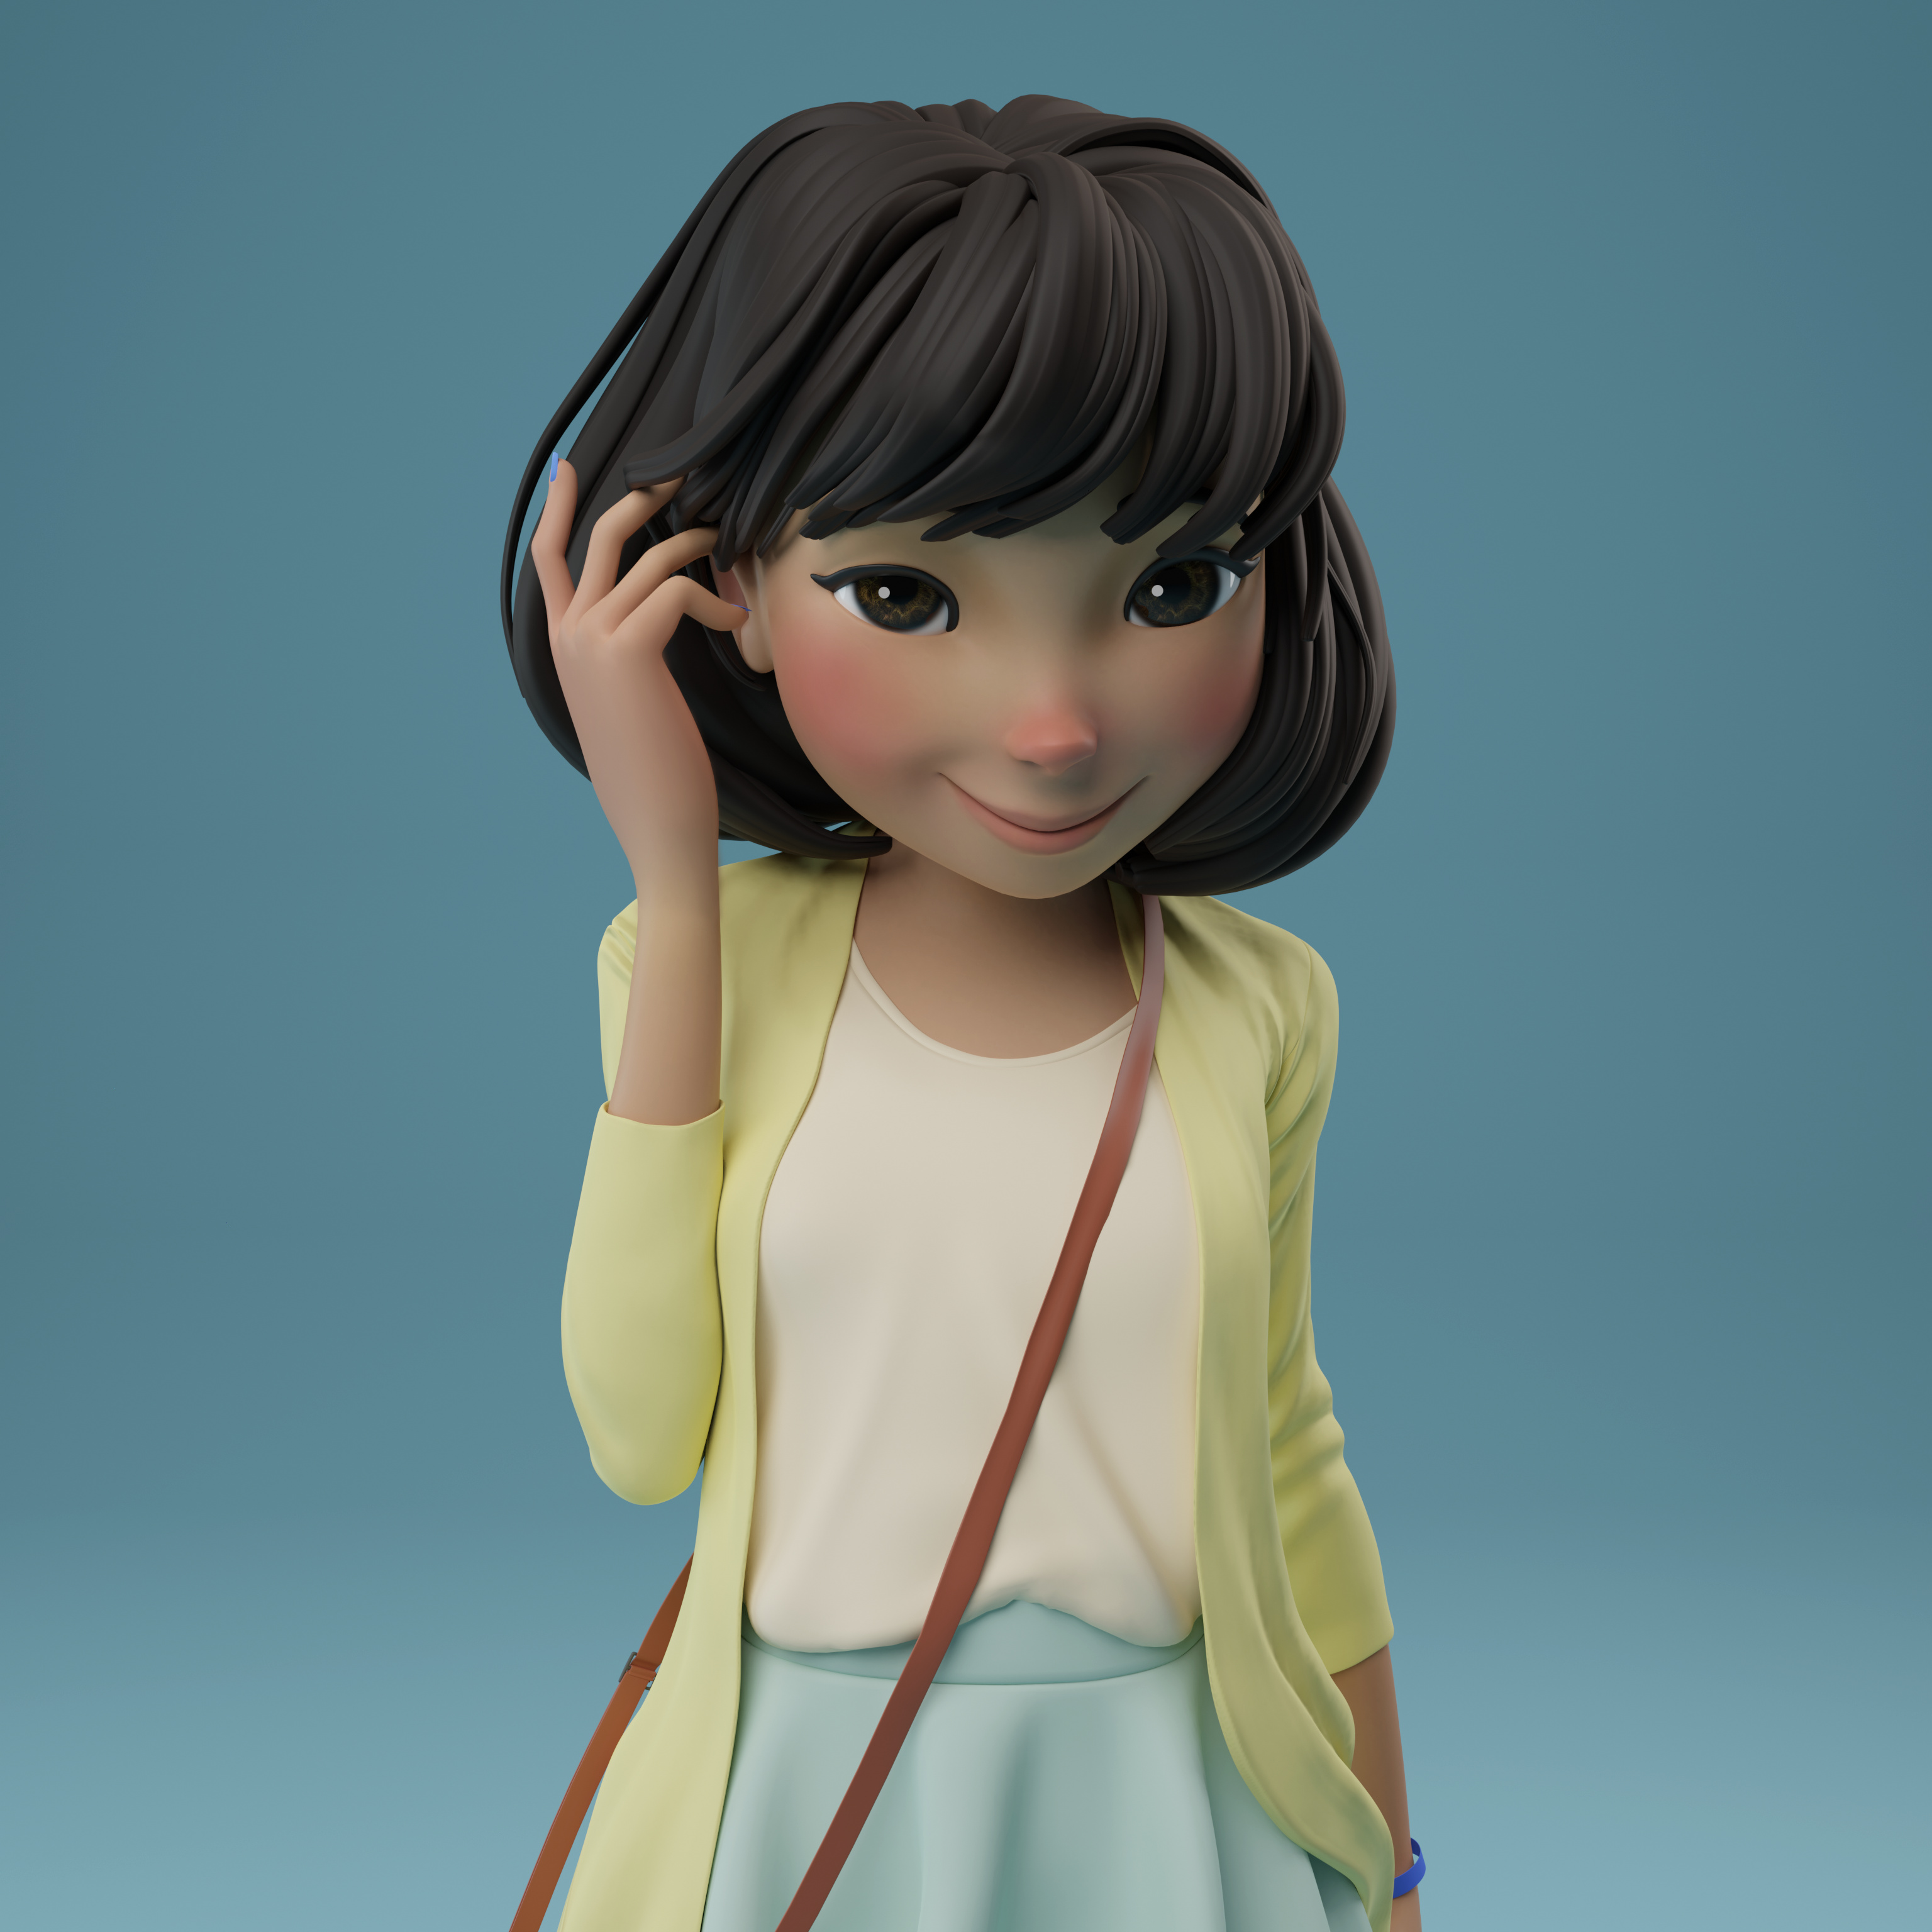 Shy Girl - Finished Projects - Blender Artists Community